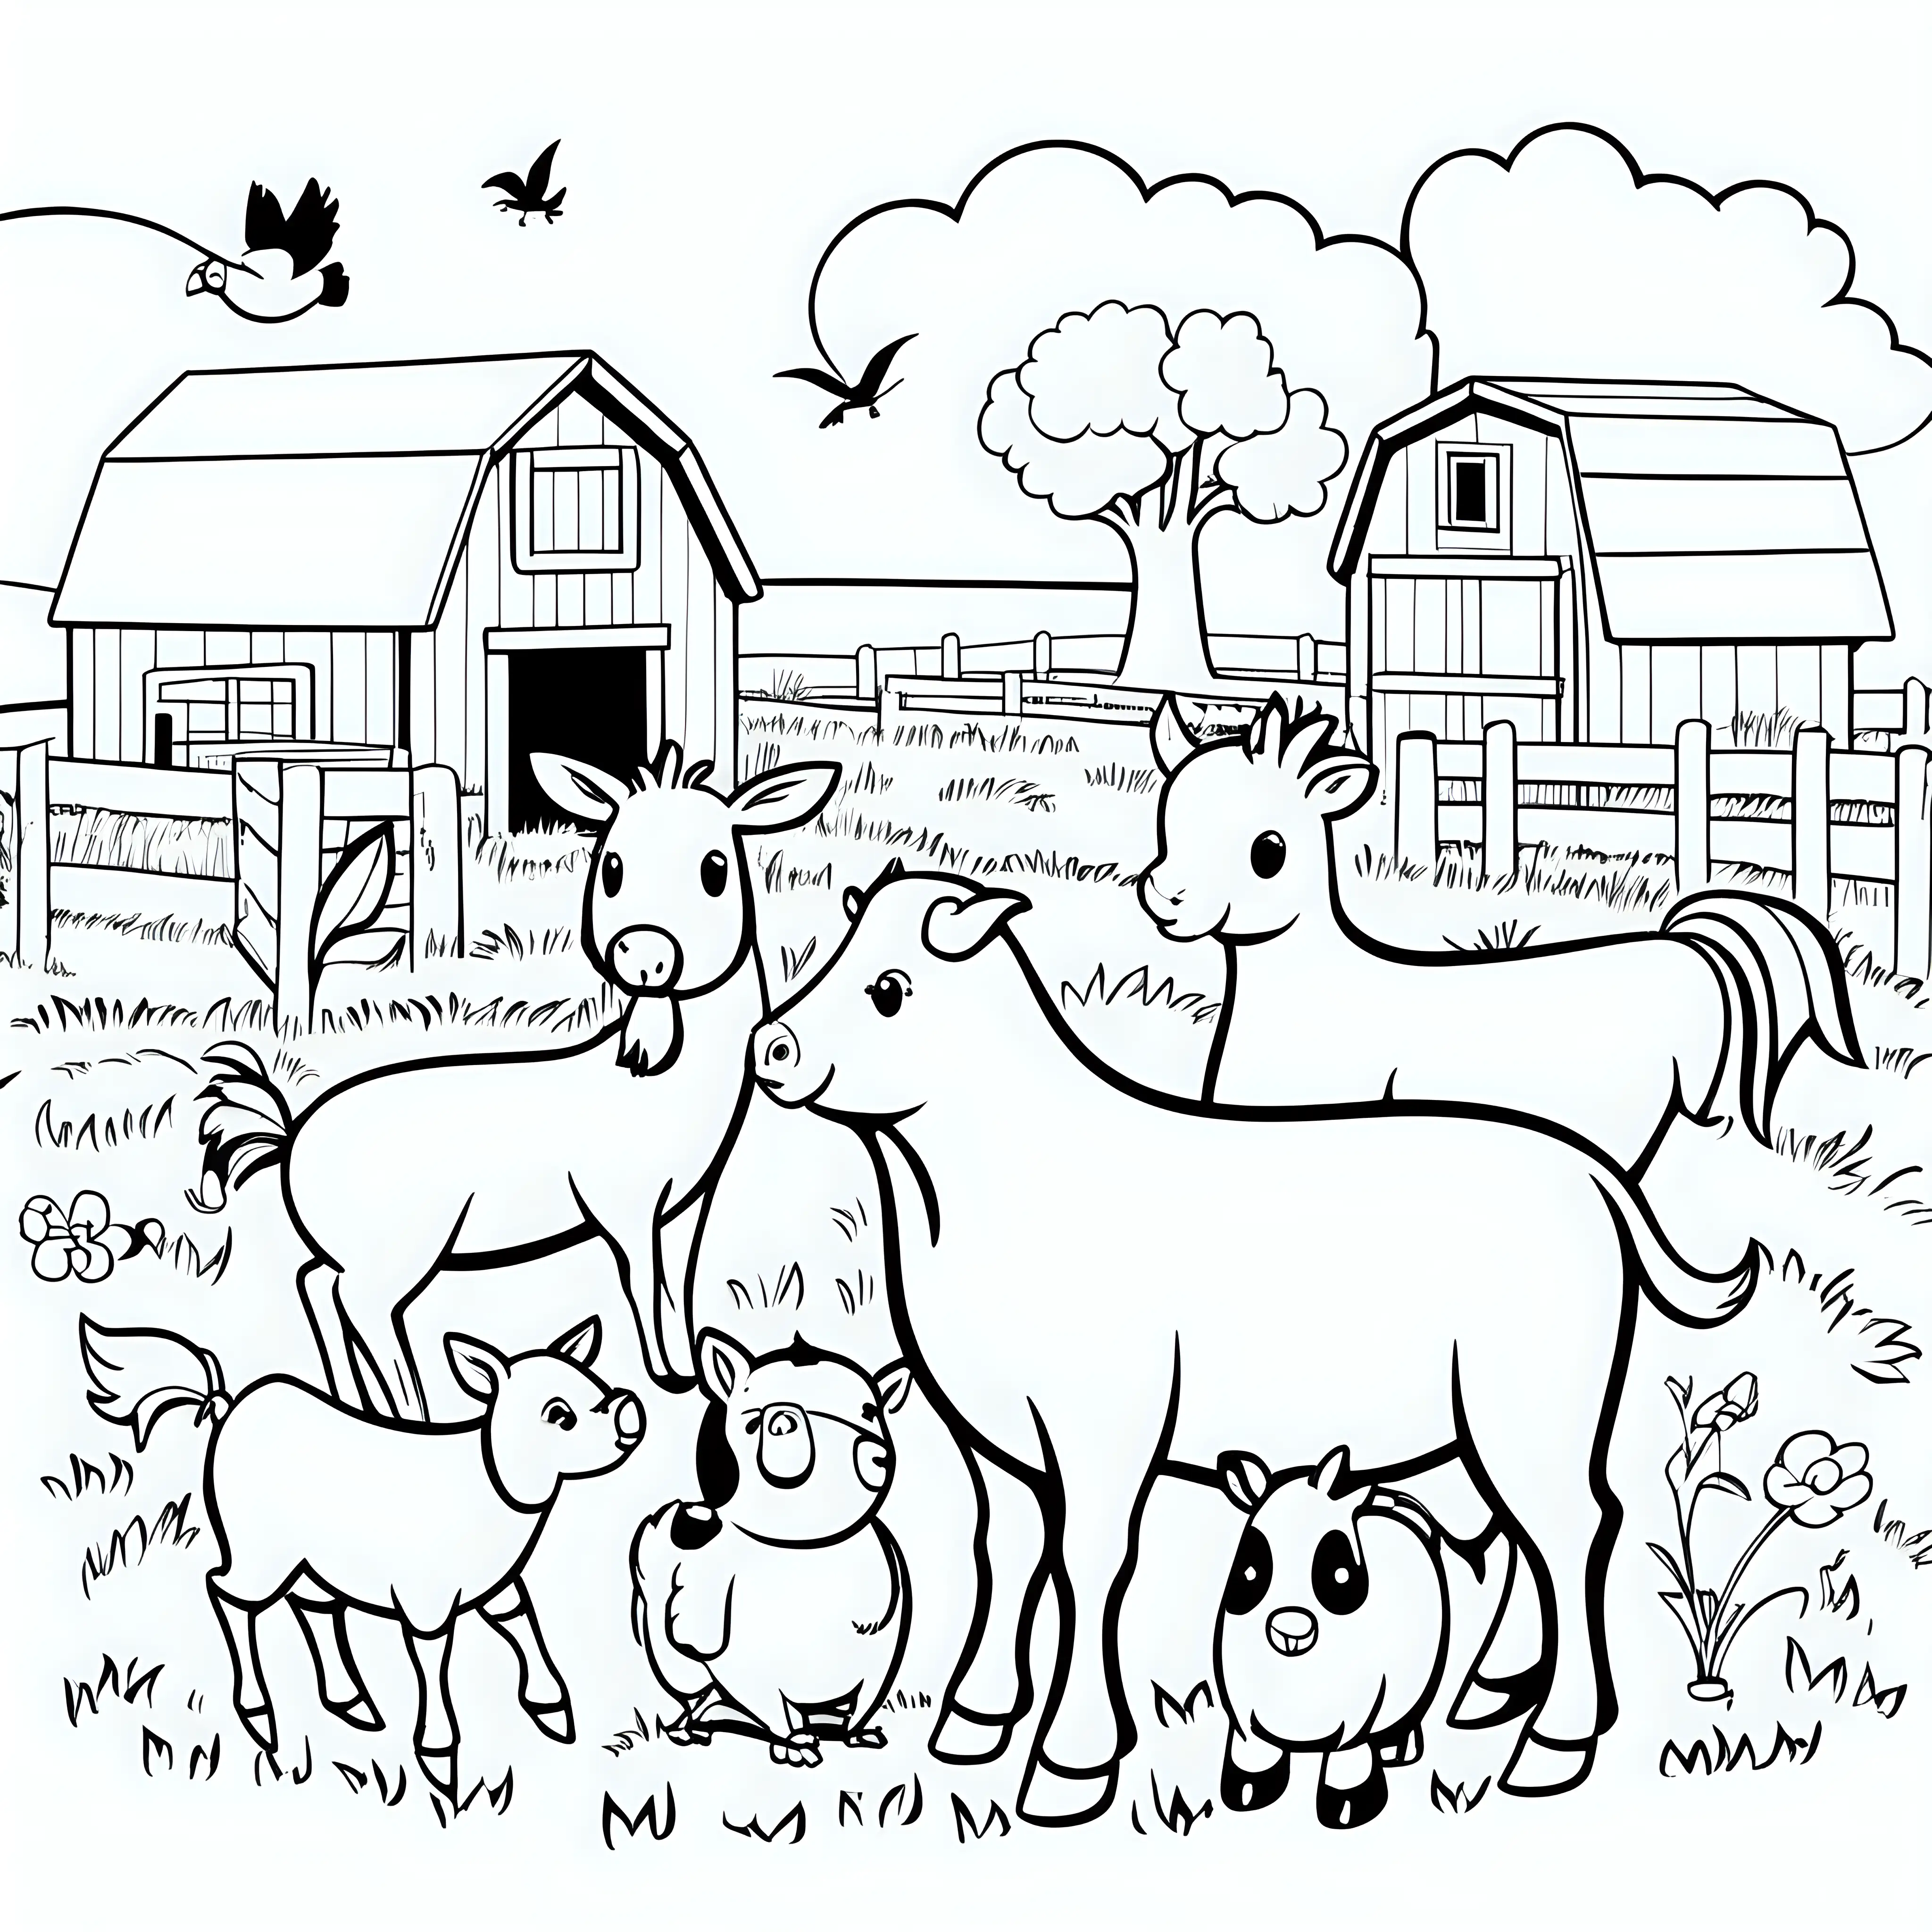 Simple black line farmyard animals images for children's colouring page